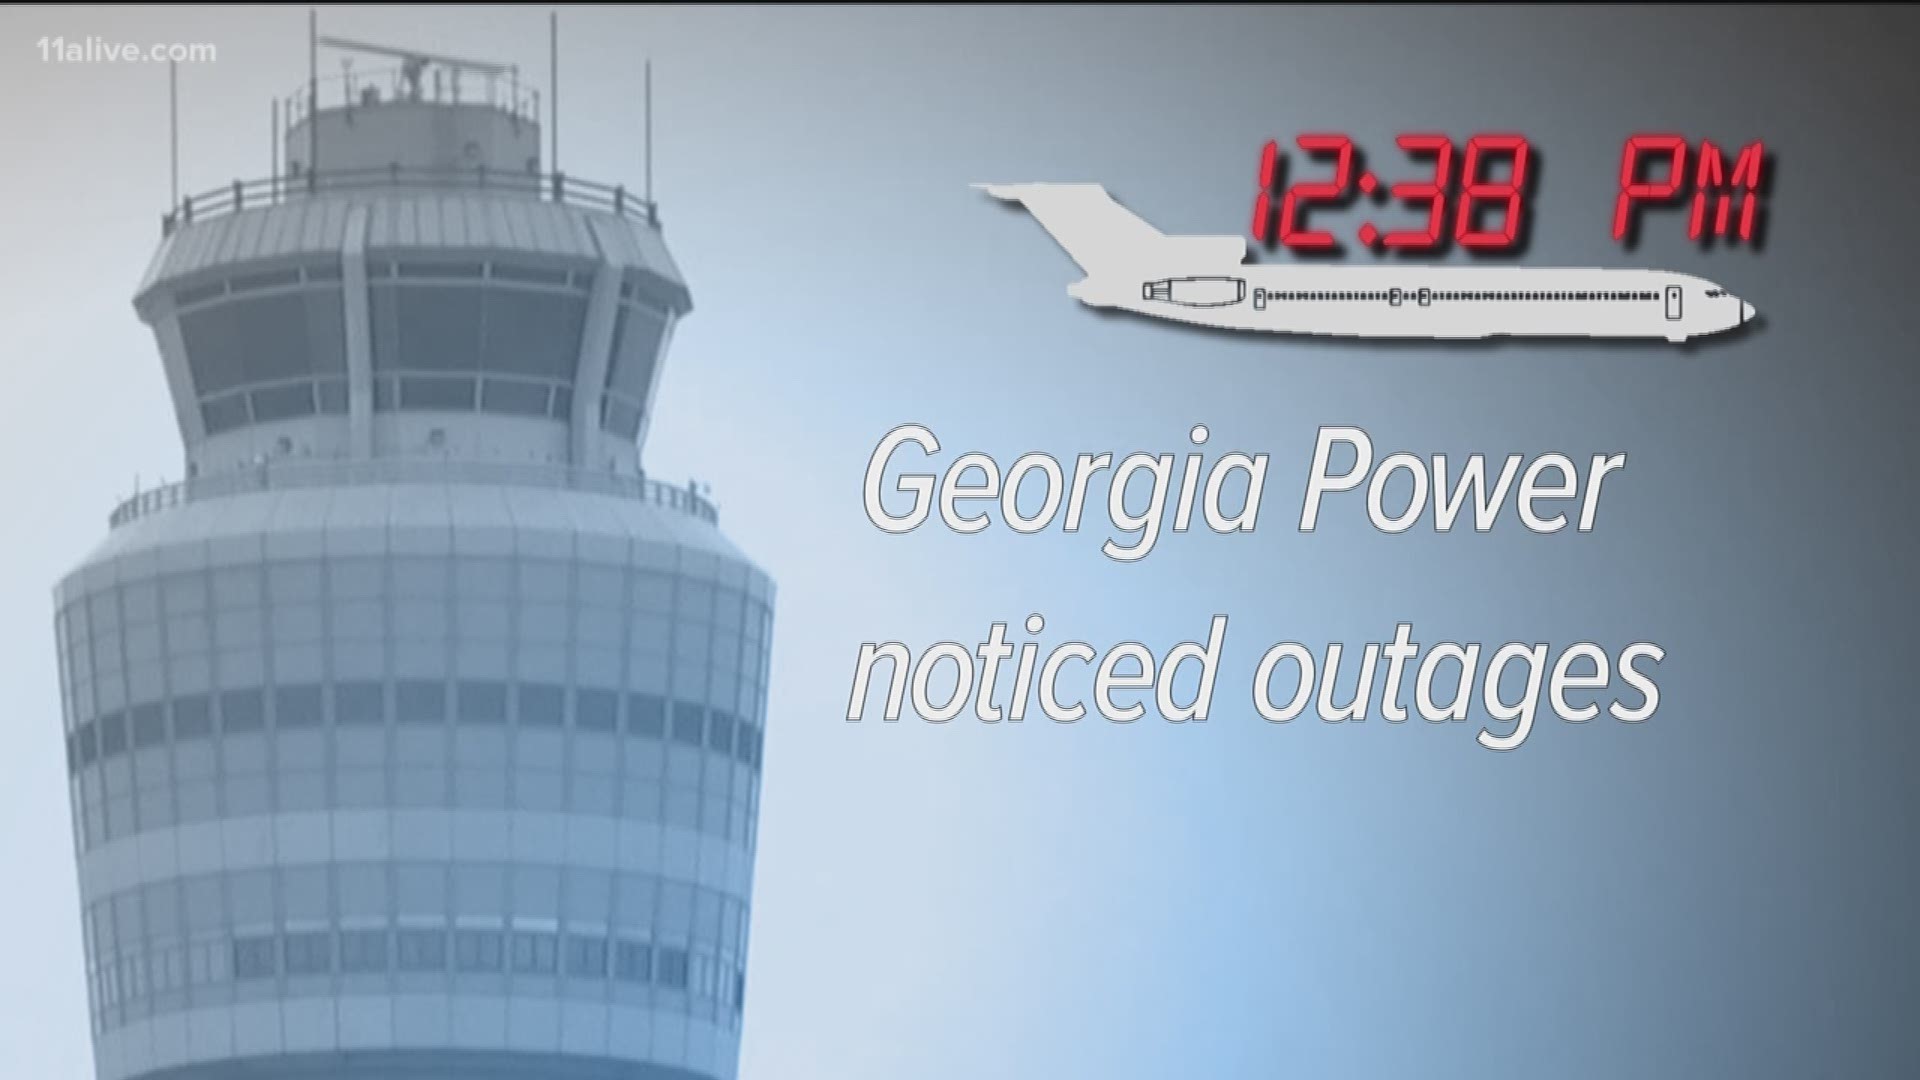 The series of events at Atlanta's airport on Sunday.